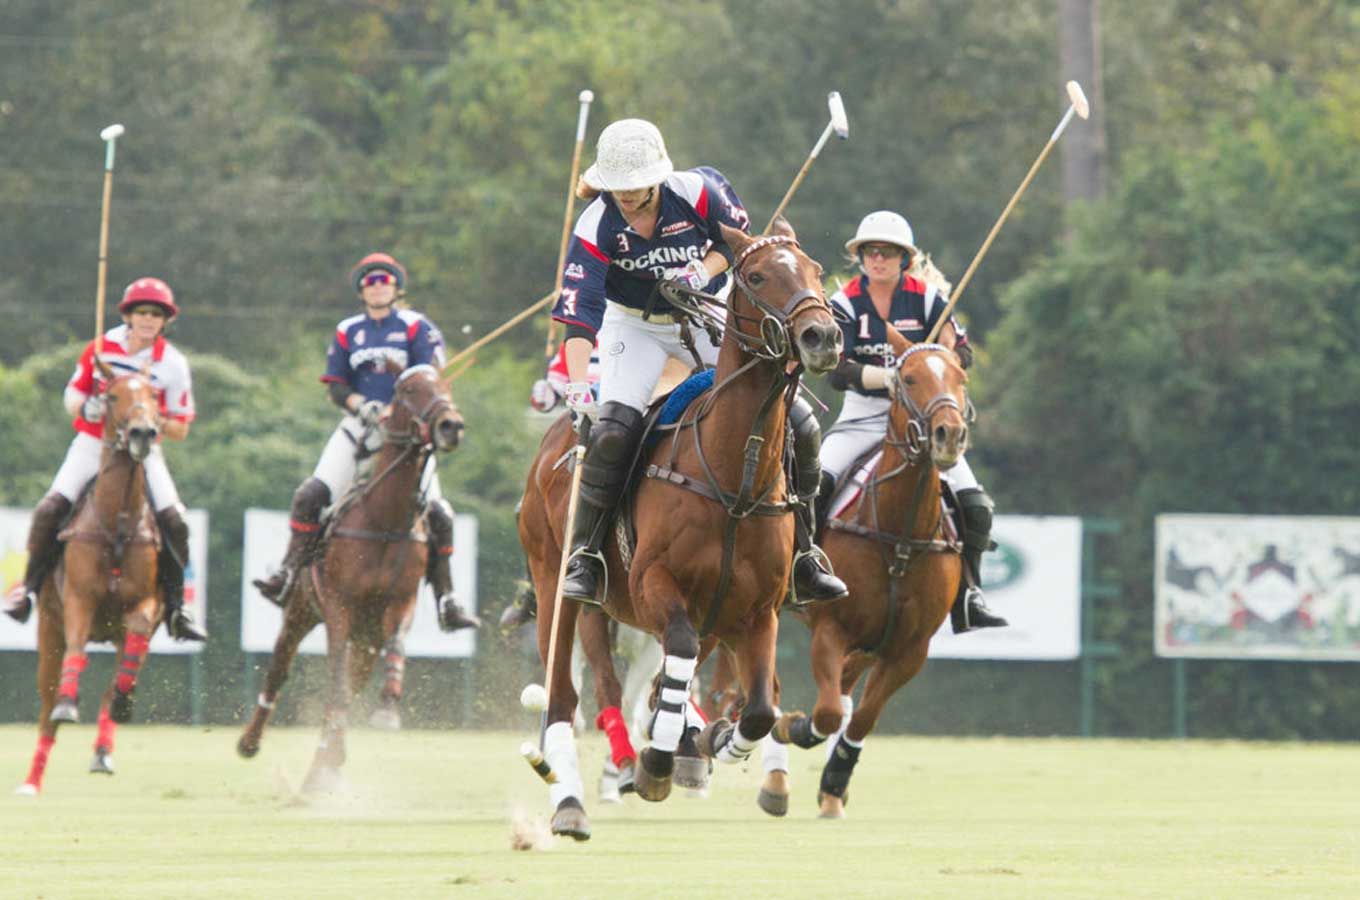 Four polo players and their horses competing at the US Open Women's Polo Championship.